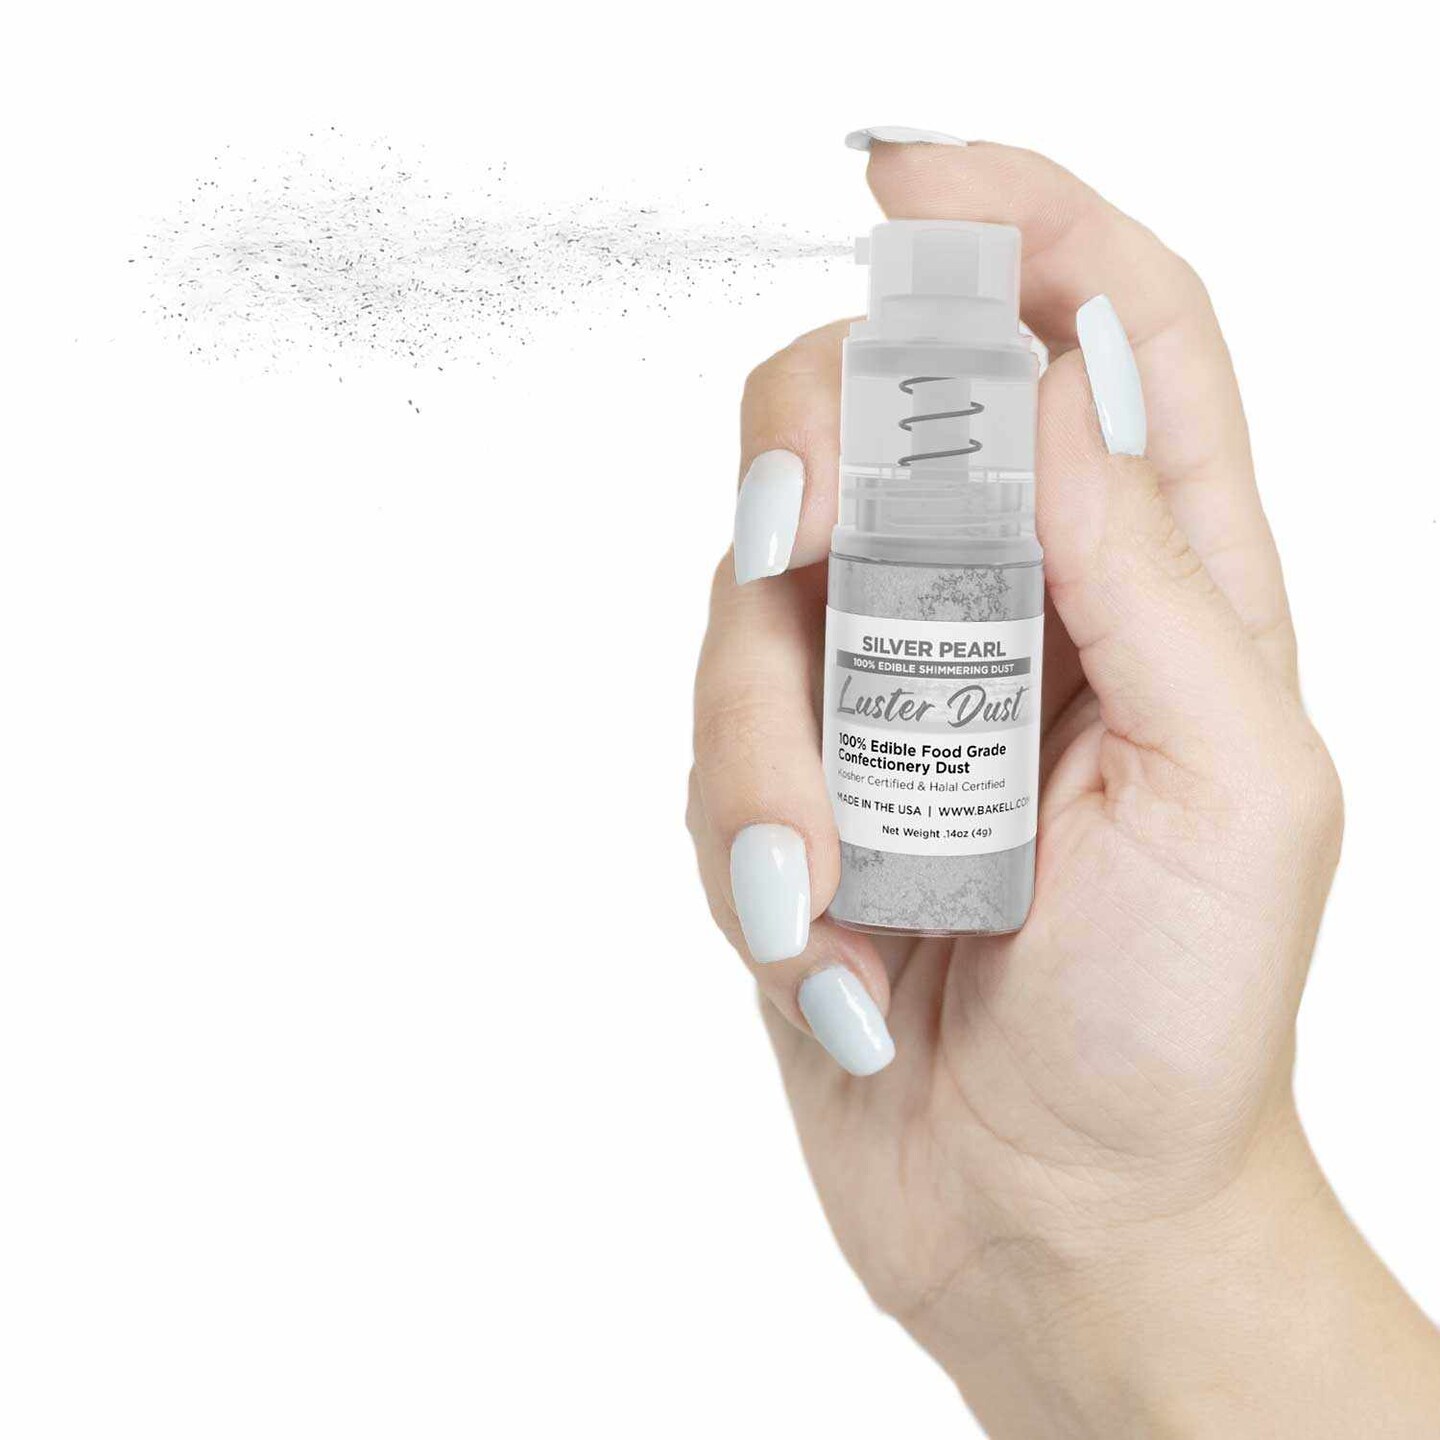 Silver Luster Dust Spray | Luster Dust Edible Glitter Spray Dust for Cakes, Cookies, Desserts, Paint. FDA Compliant (4 Gram Pump)